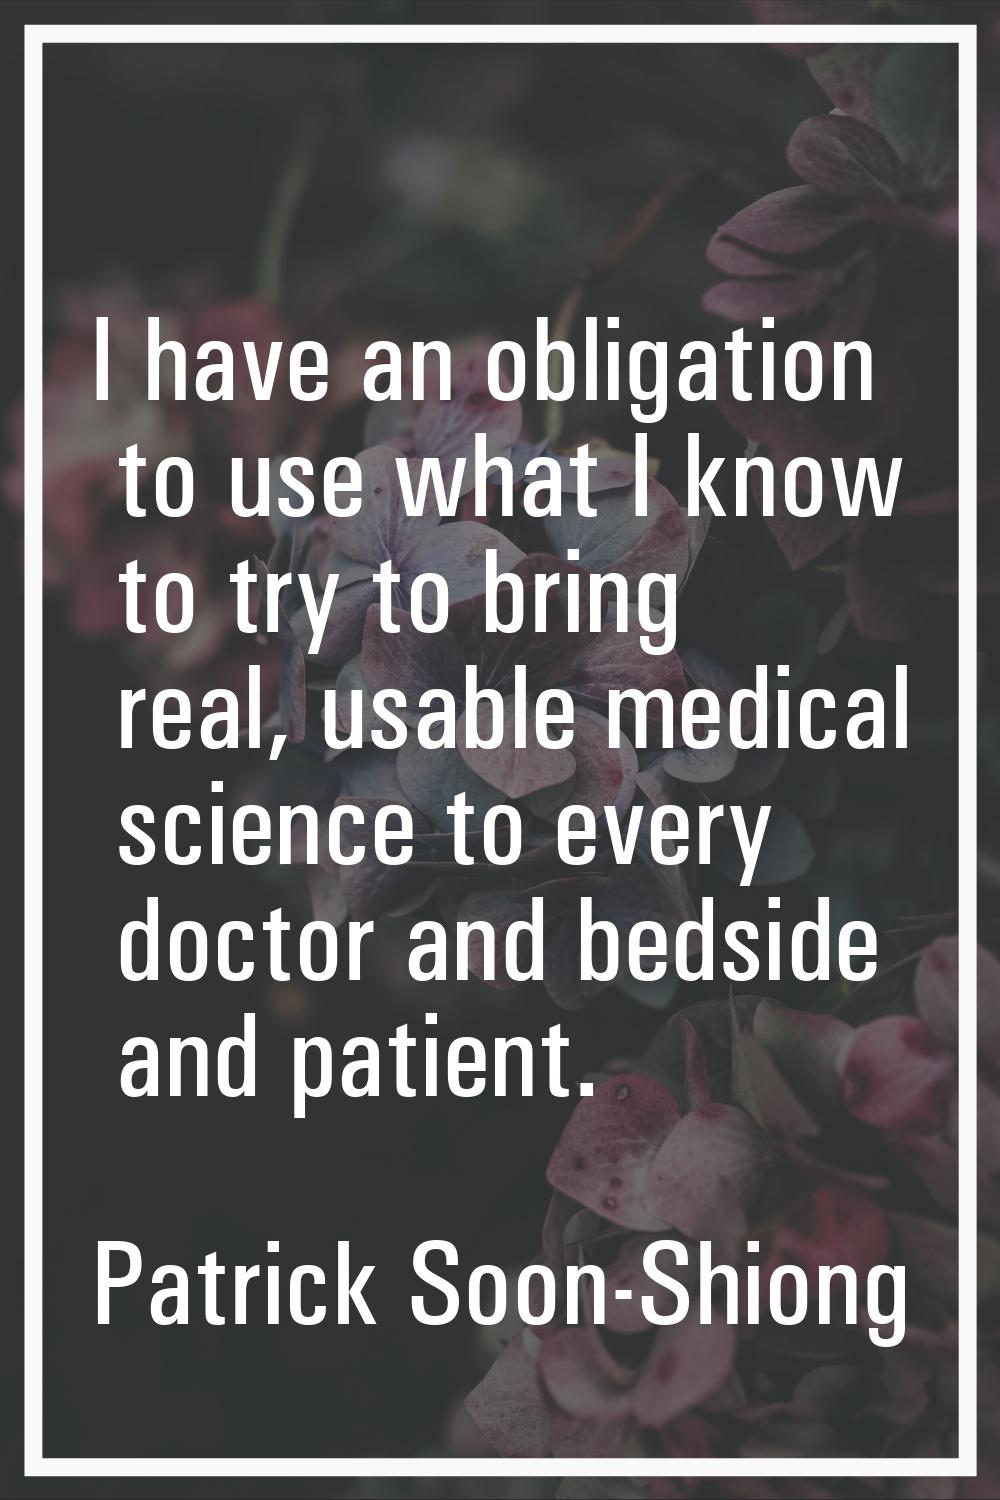 I have an obligation to use what I know to try to bring real, usable medical science to every docto